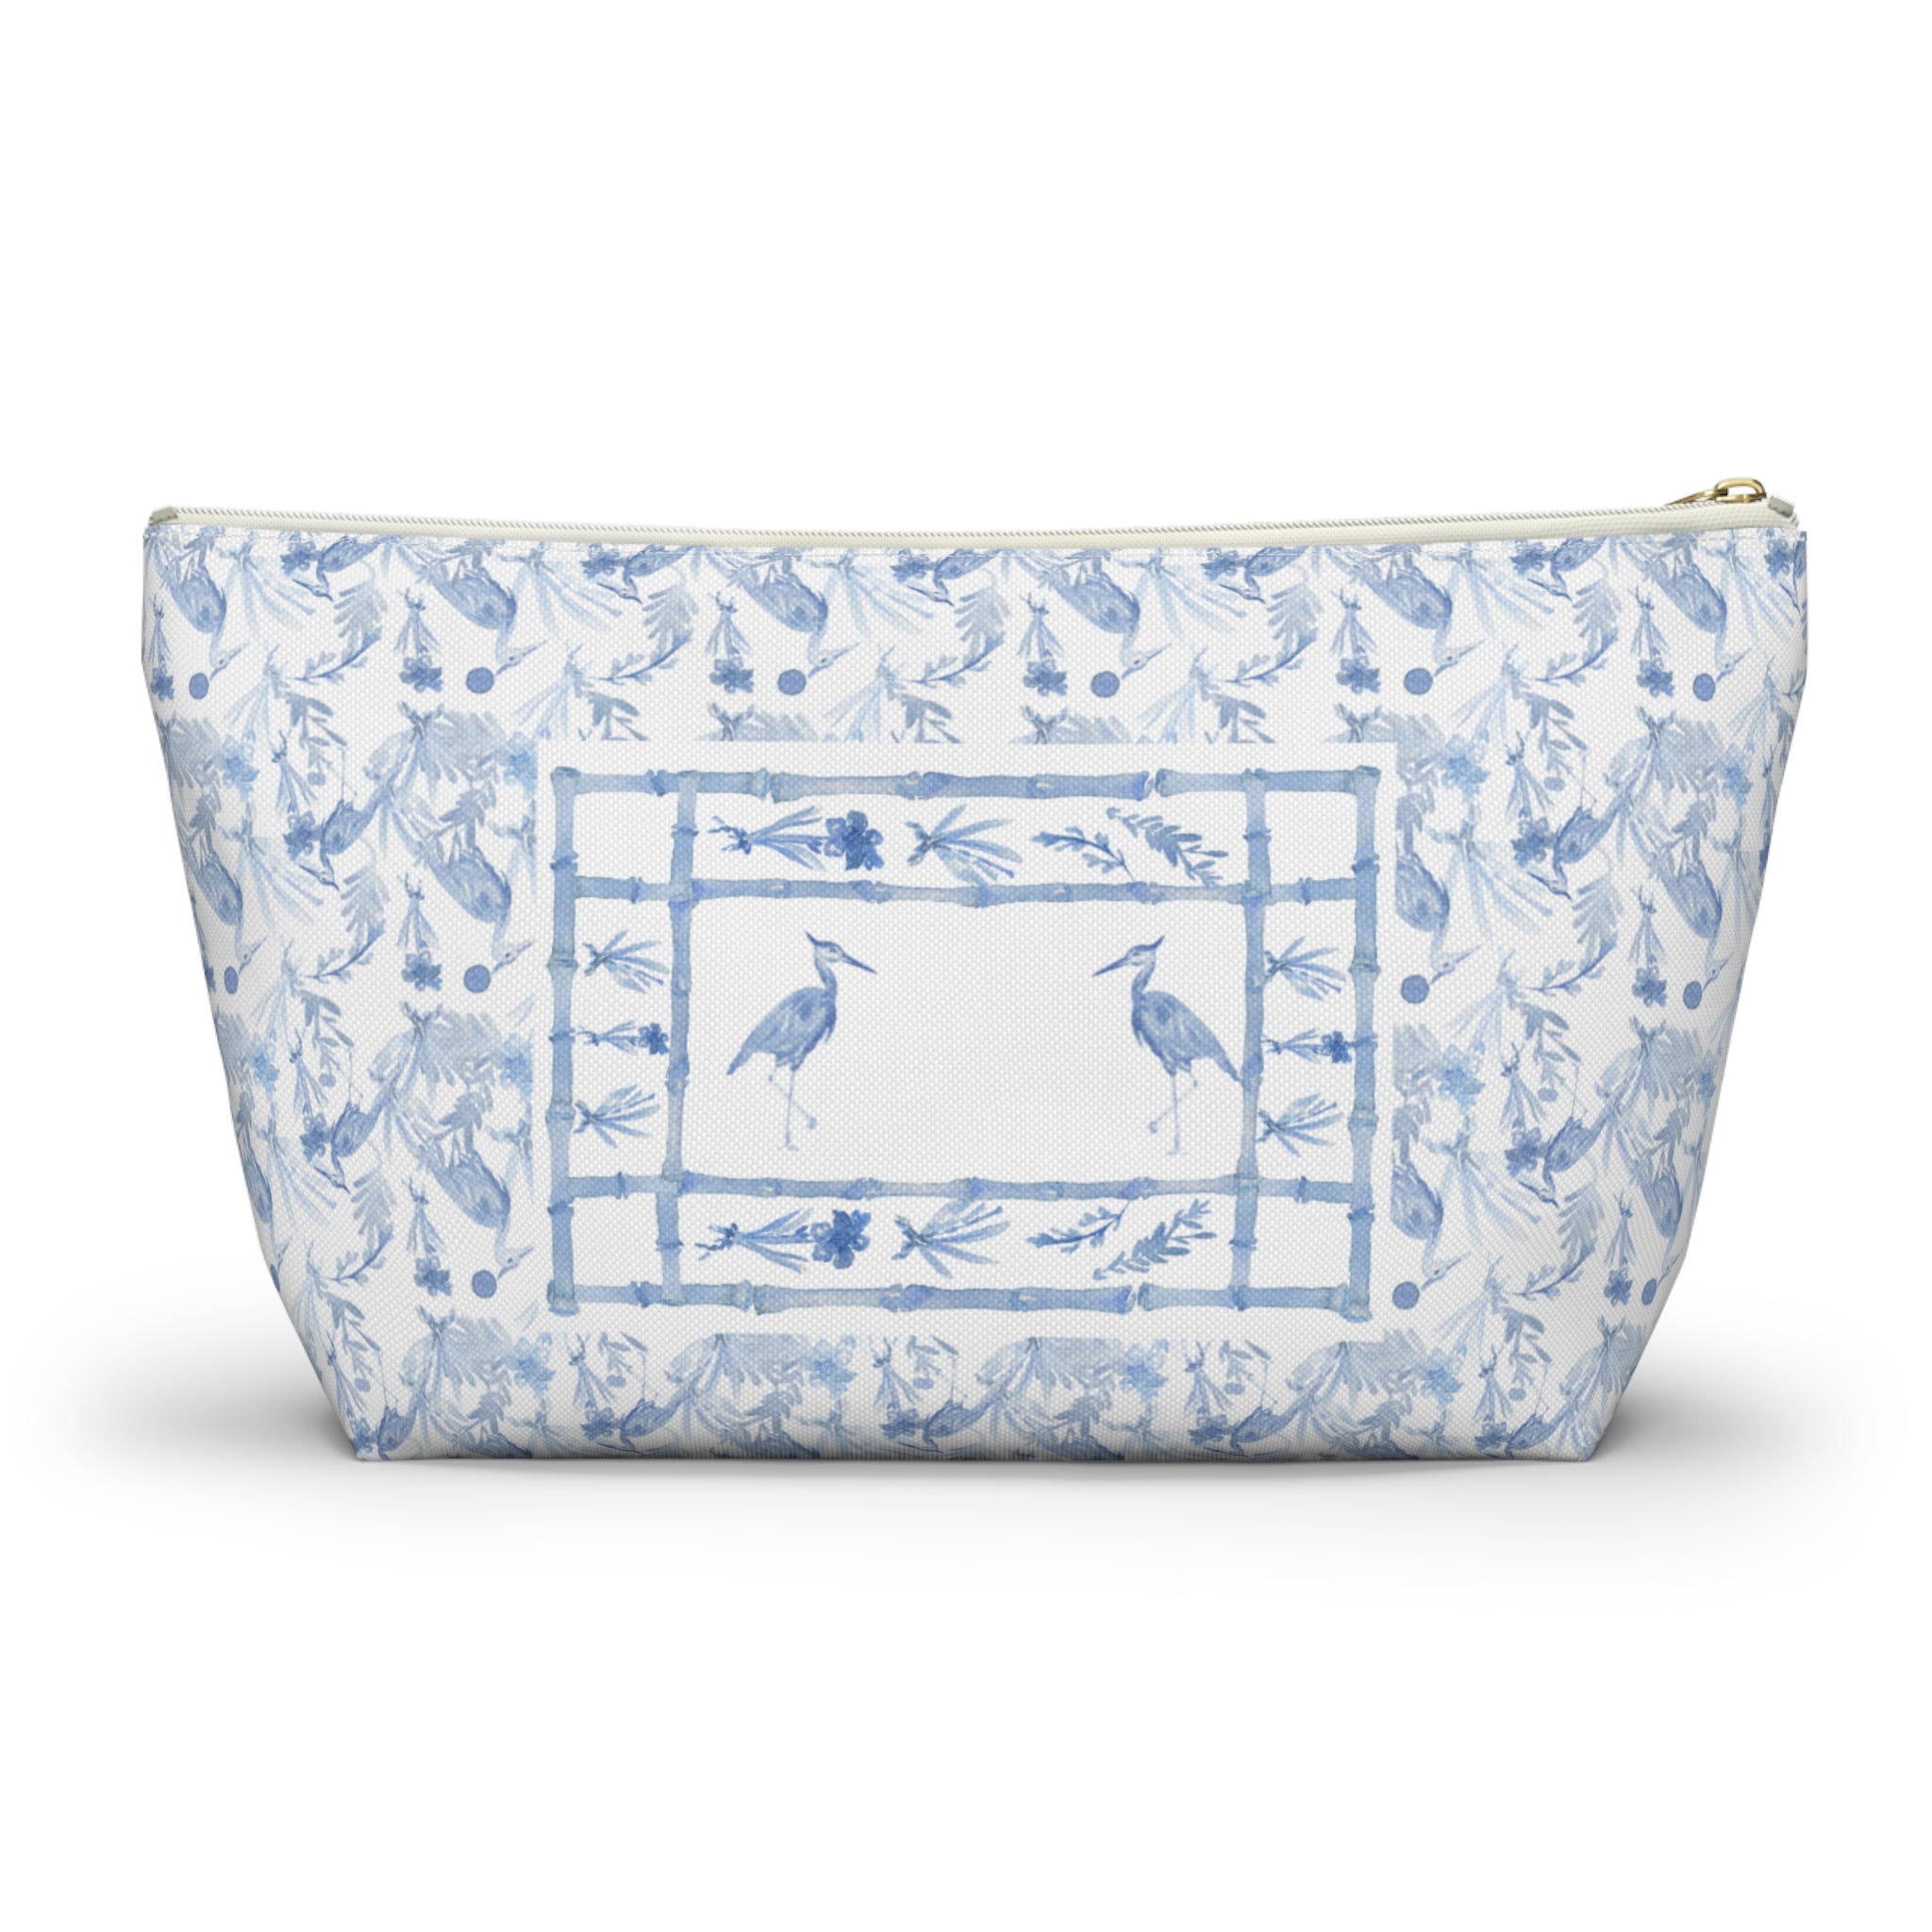 French Country, Coquette Bag, Coquette Make-up Bag, Coquette